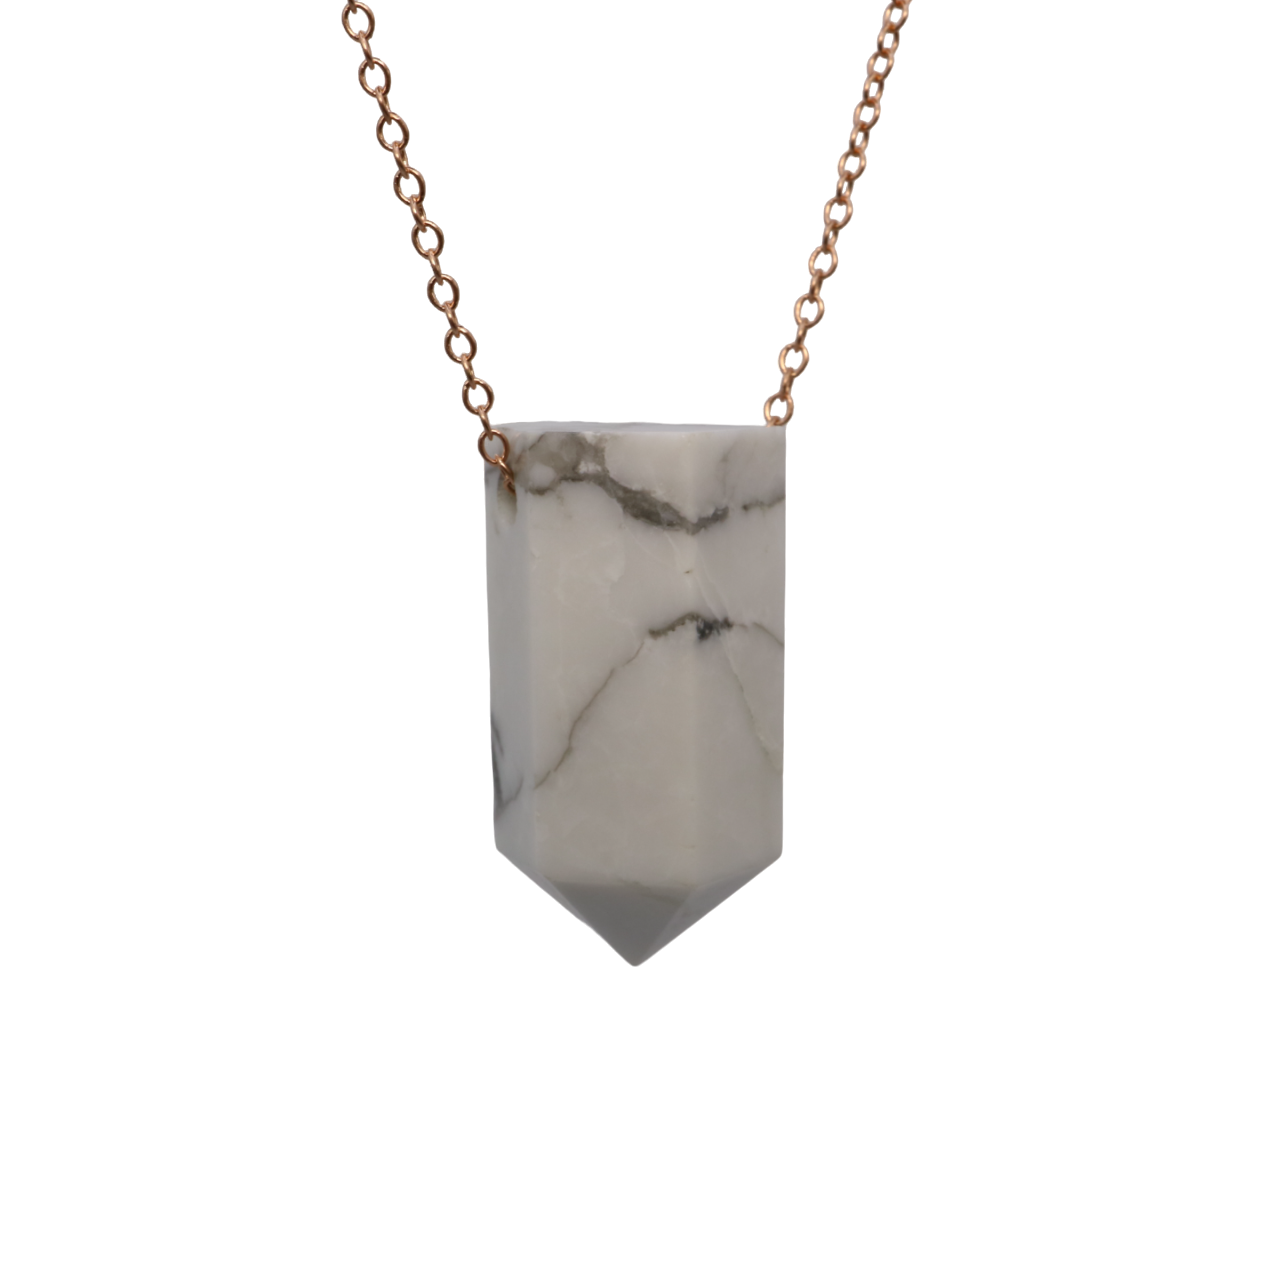 Howlite on a fine Rose Gold plated 925 Sterling Silver chain